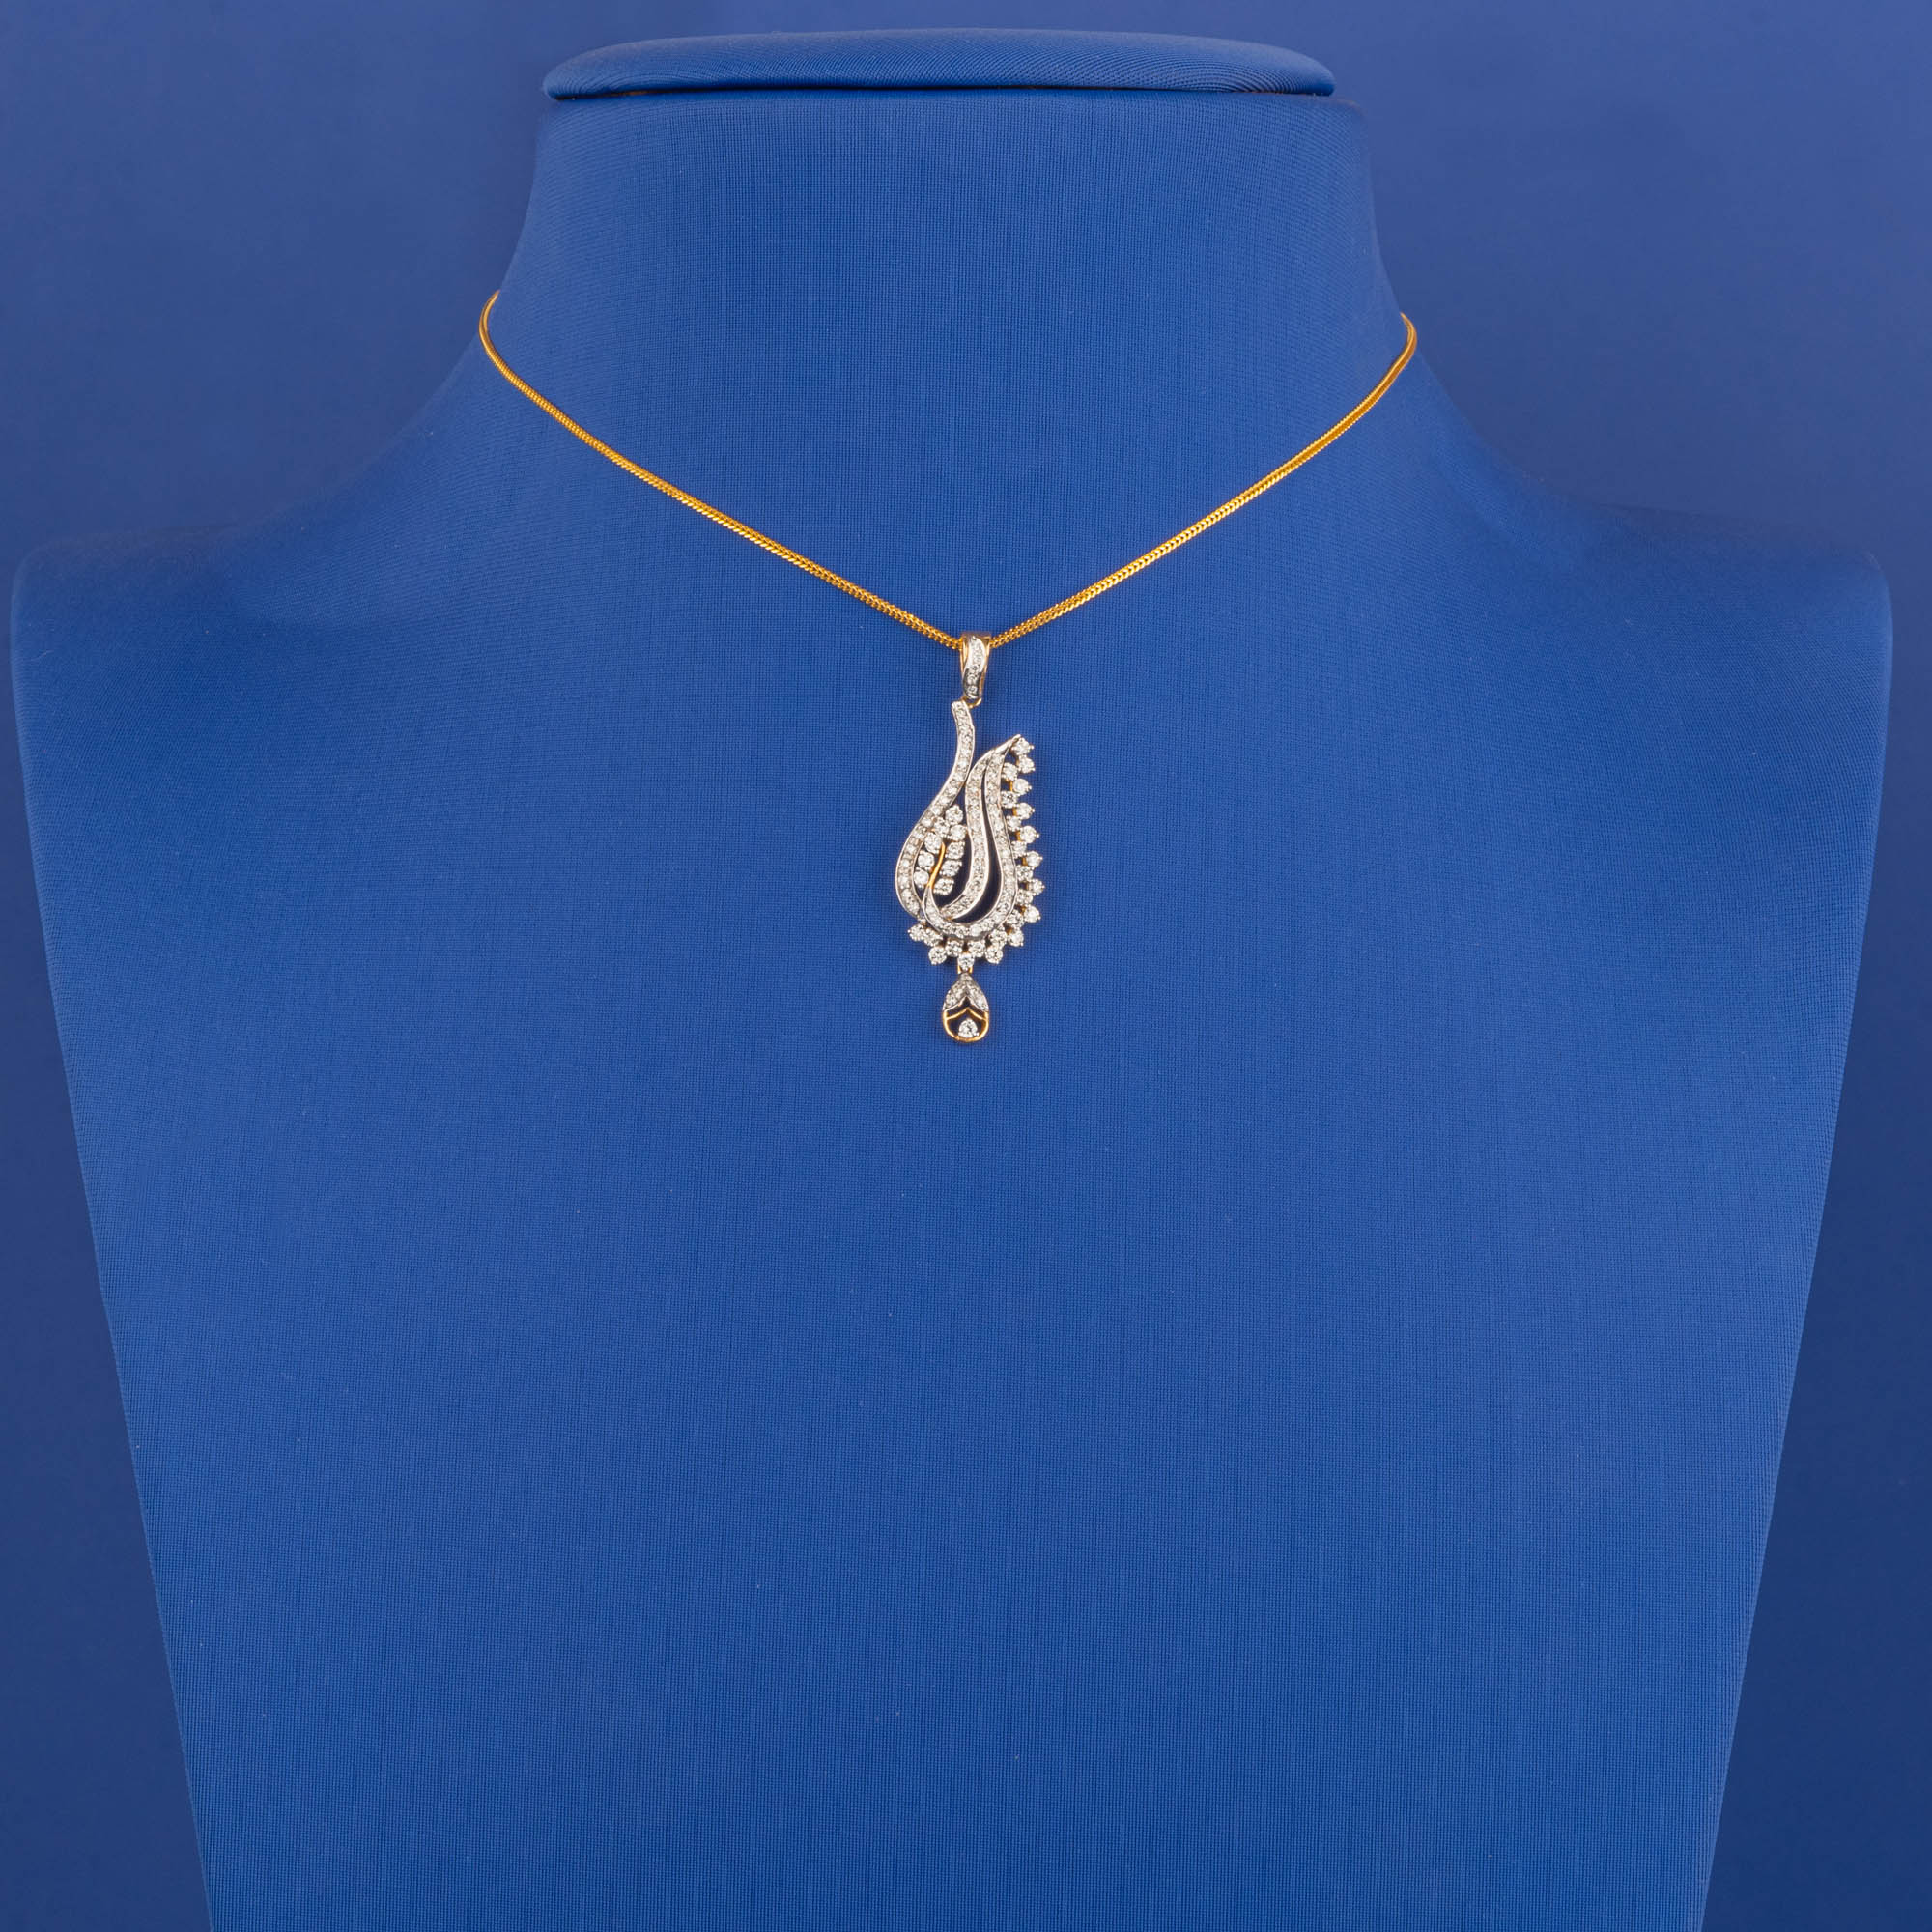 Elegance Unveiled: Yellow Gold Diamond Pendant (chain not included)